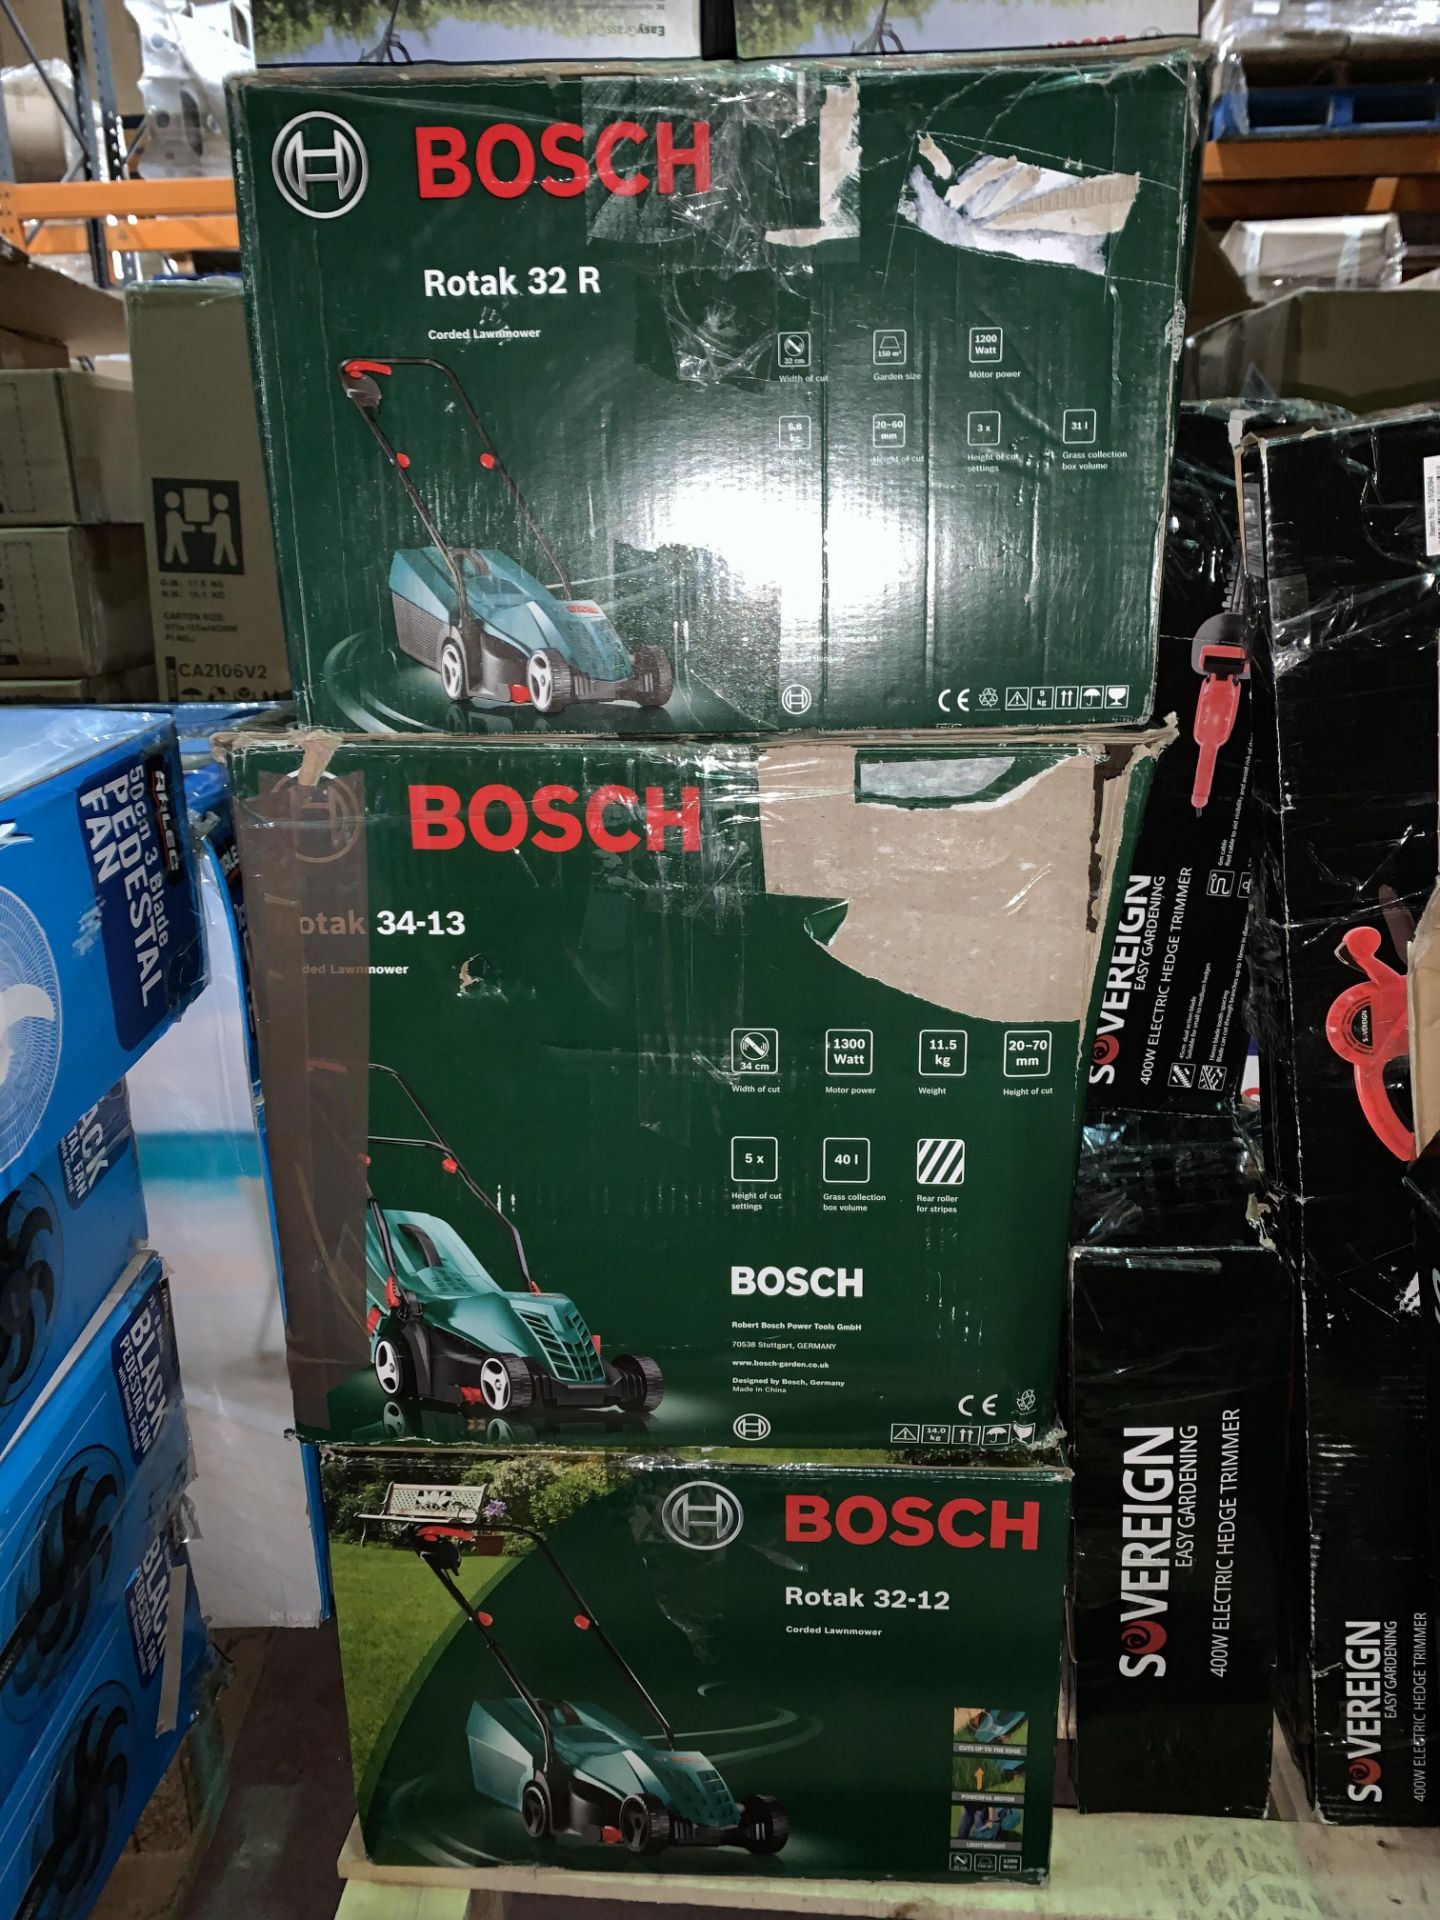 3 X BOSCH ROTAK LAWNMOWERS INCLUDES 32-12 CORDED, 34-13 CORDED & 32R CORDED LAWNMOWER UNCHECKED/